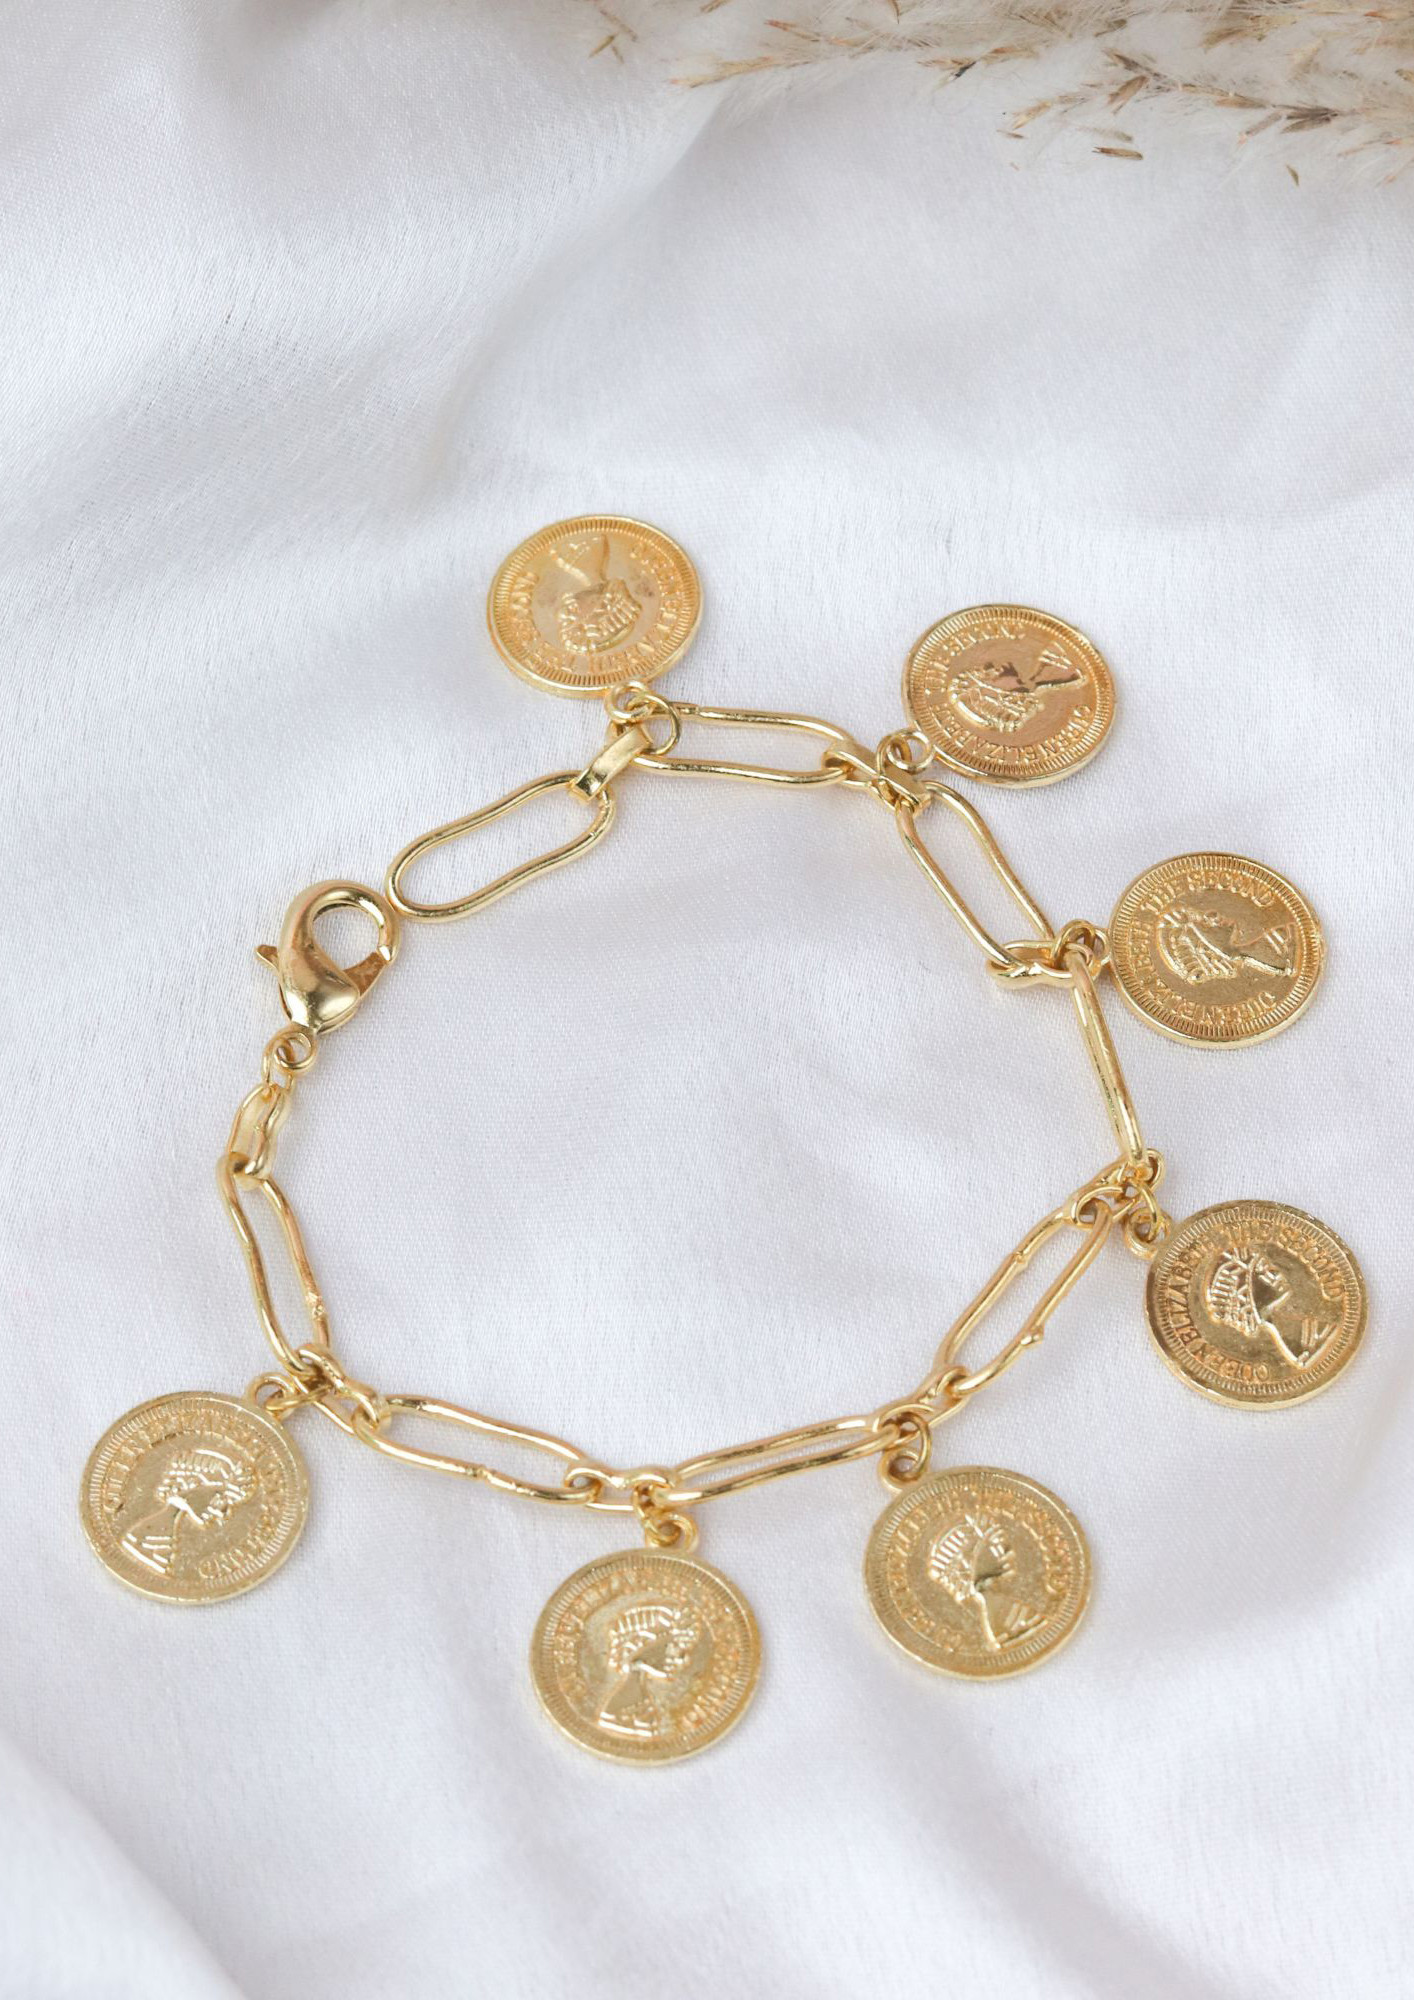 Buy Handcrafted Gold Plated Coin Bracelet for Women Online in India